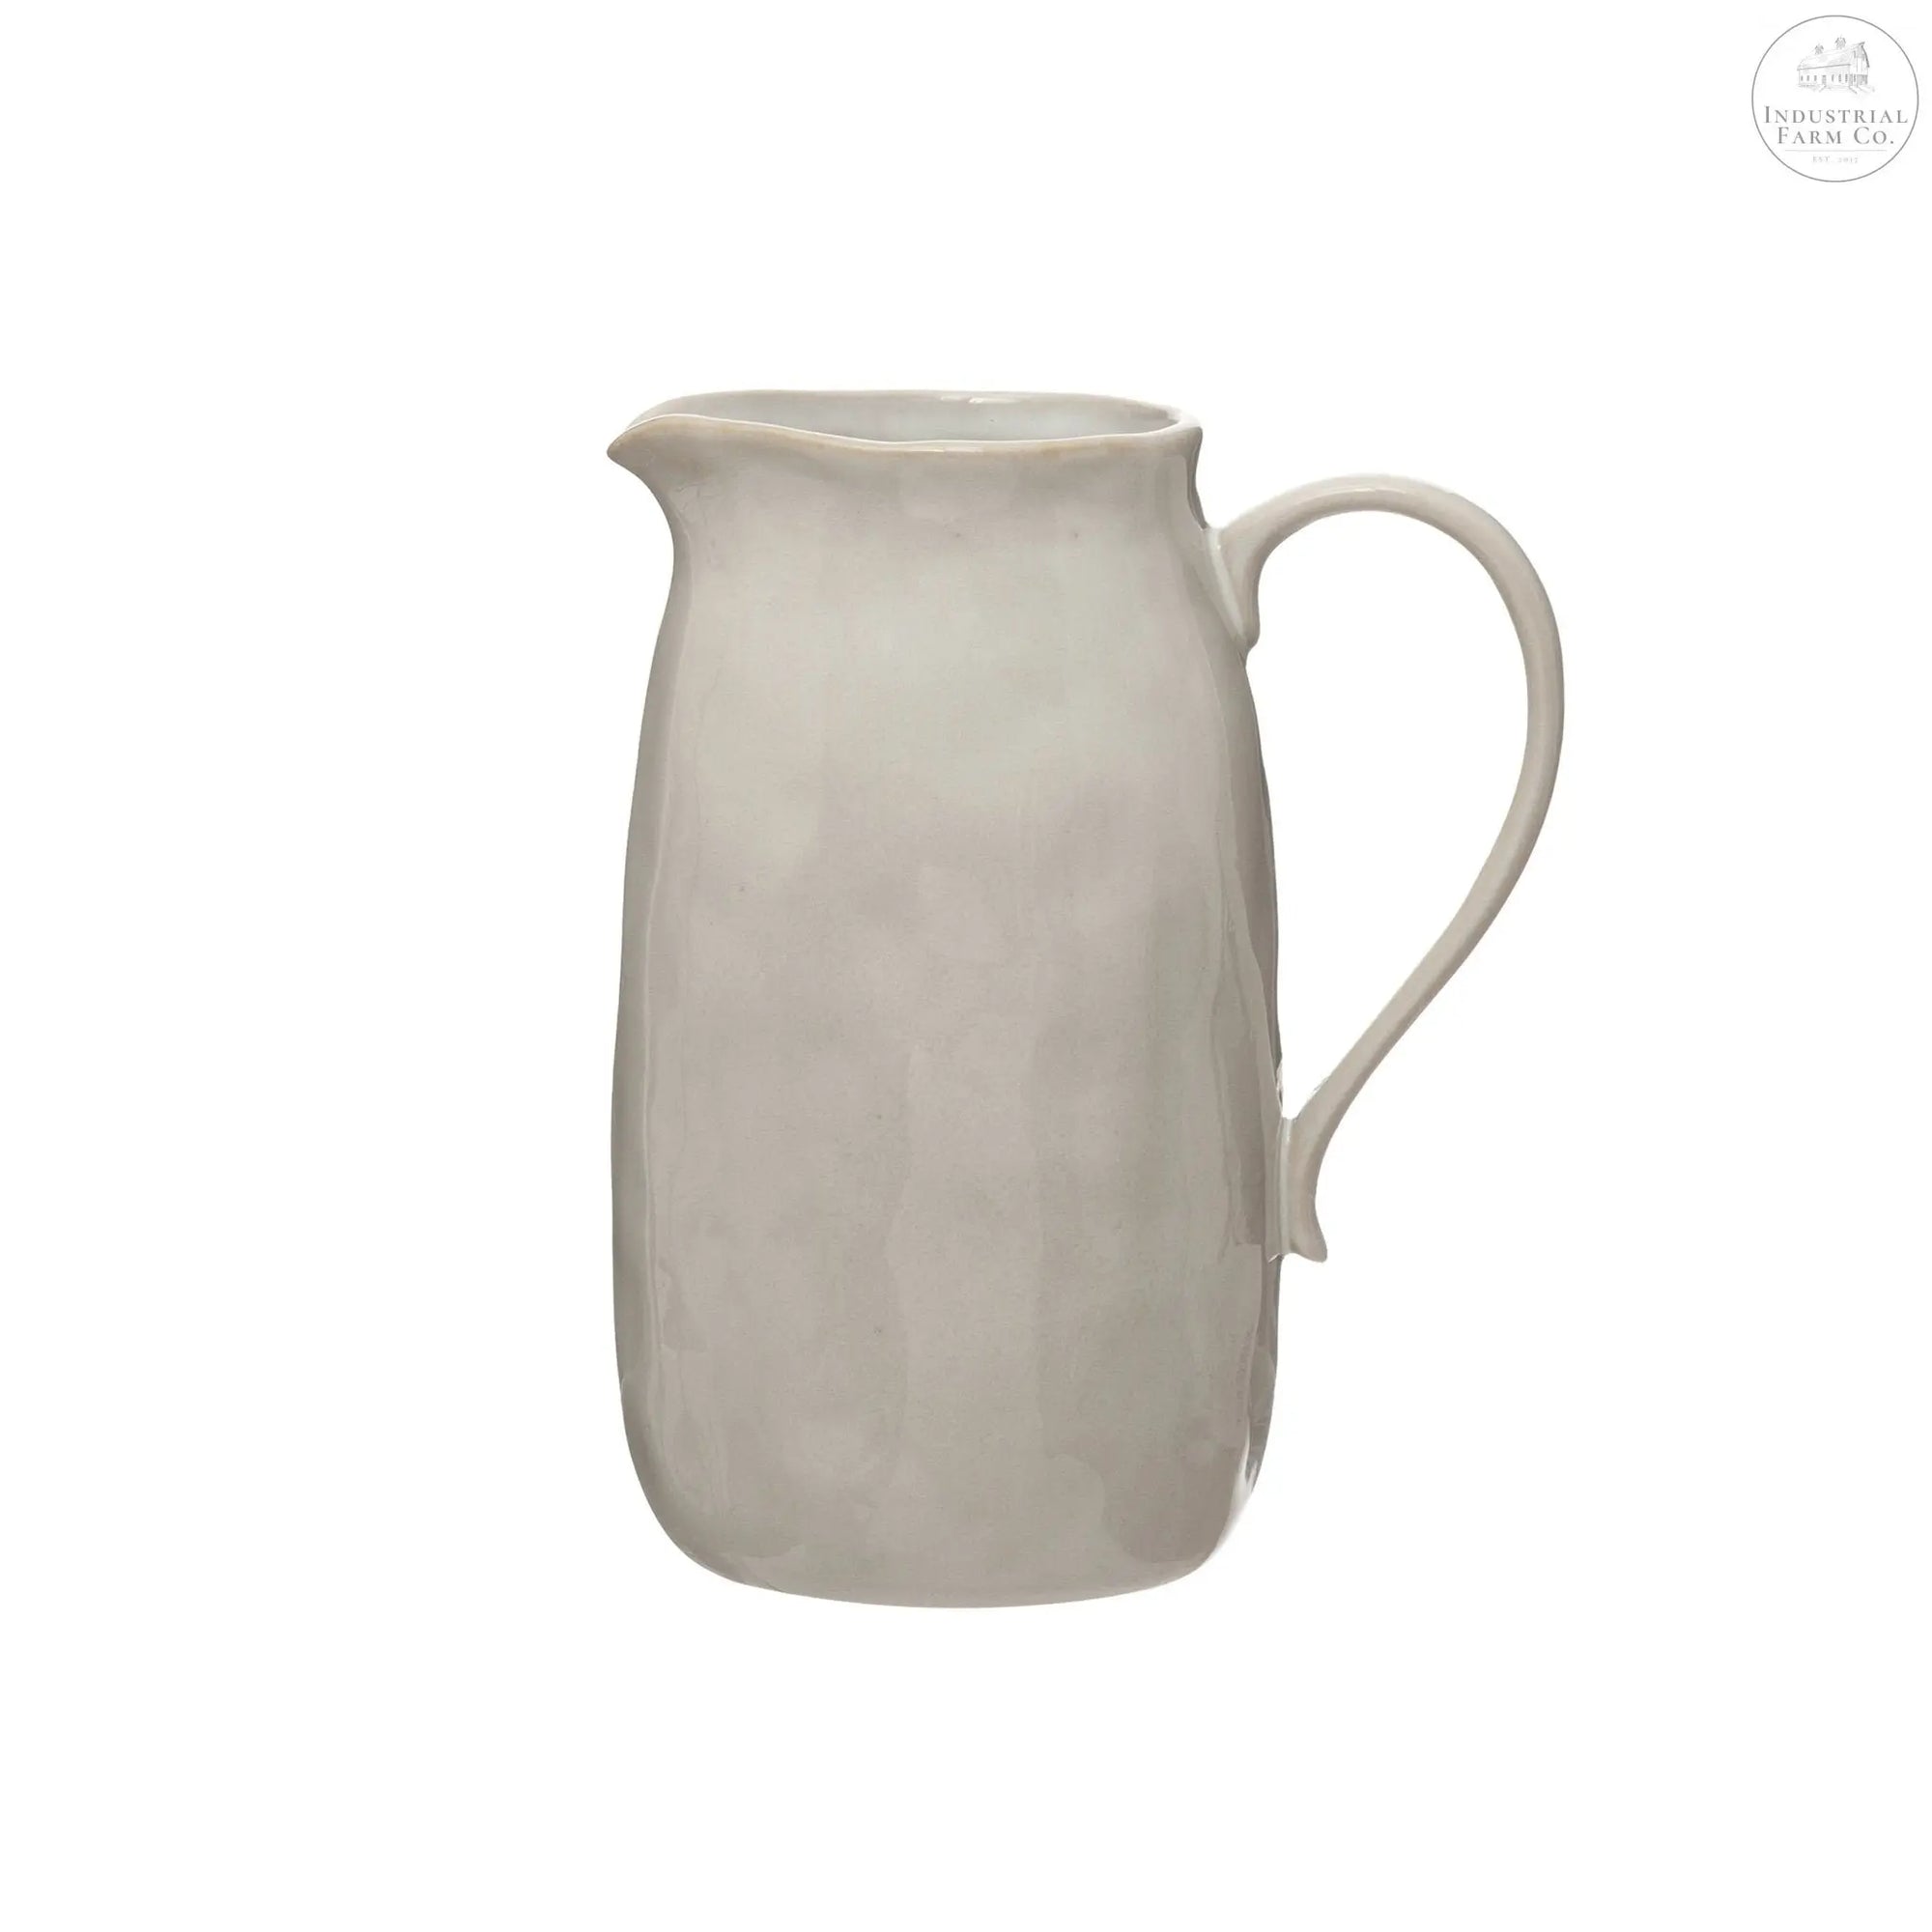 The Lilly Stoneware Pitcher | Industrial Farm Co